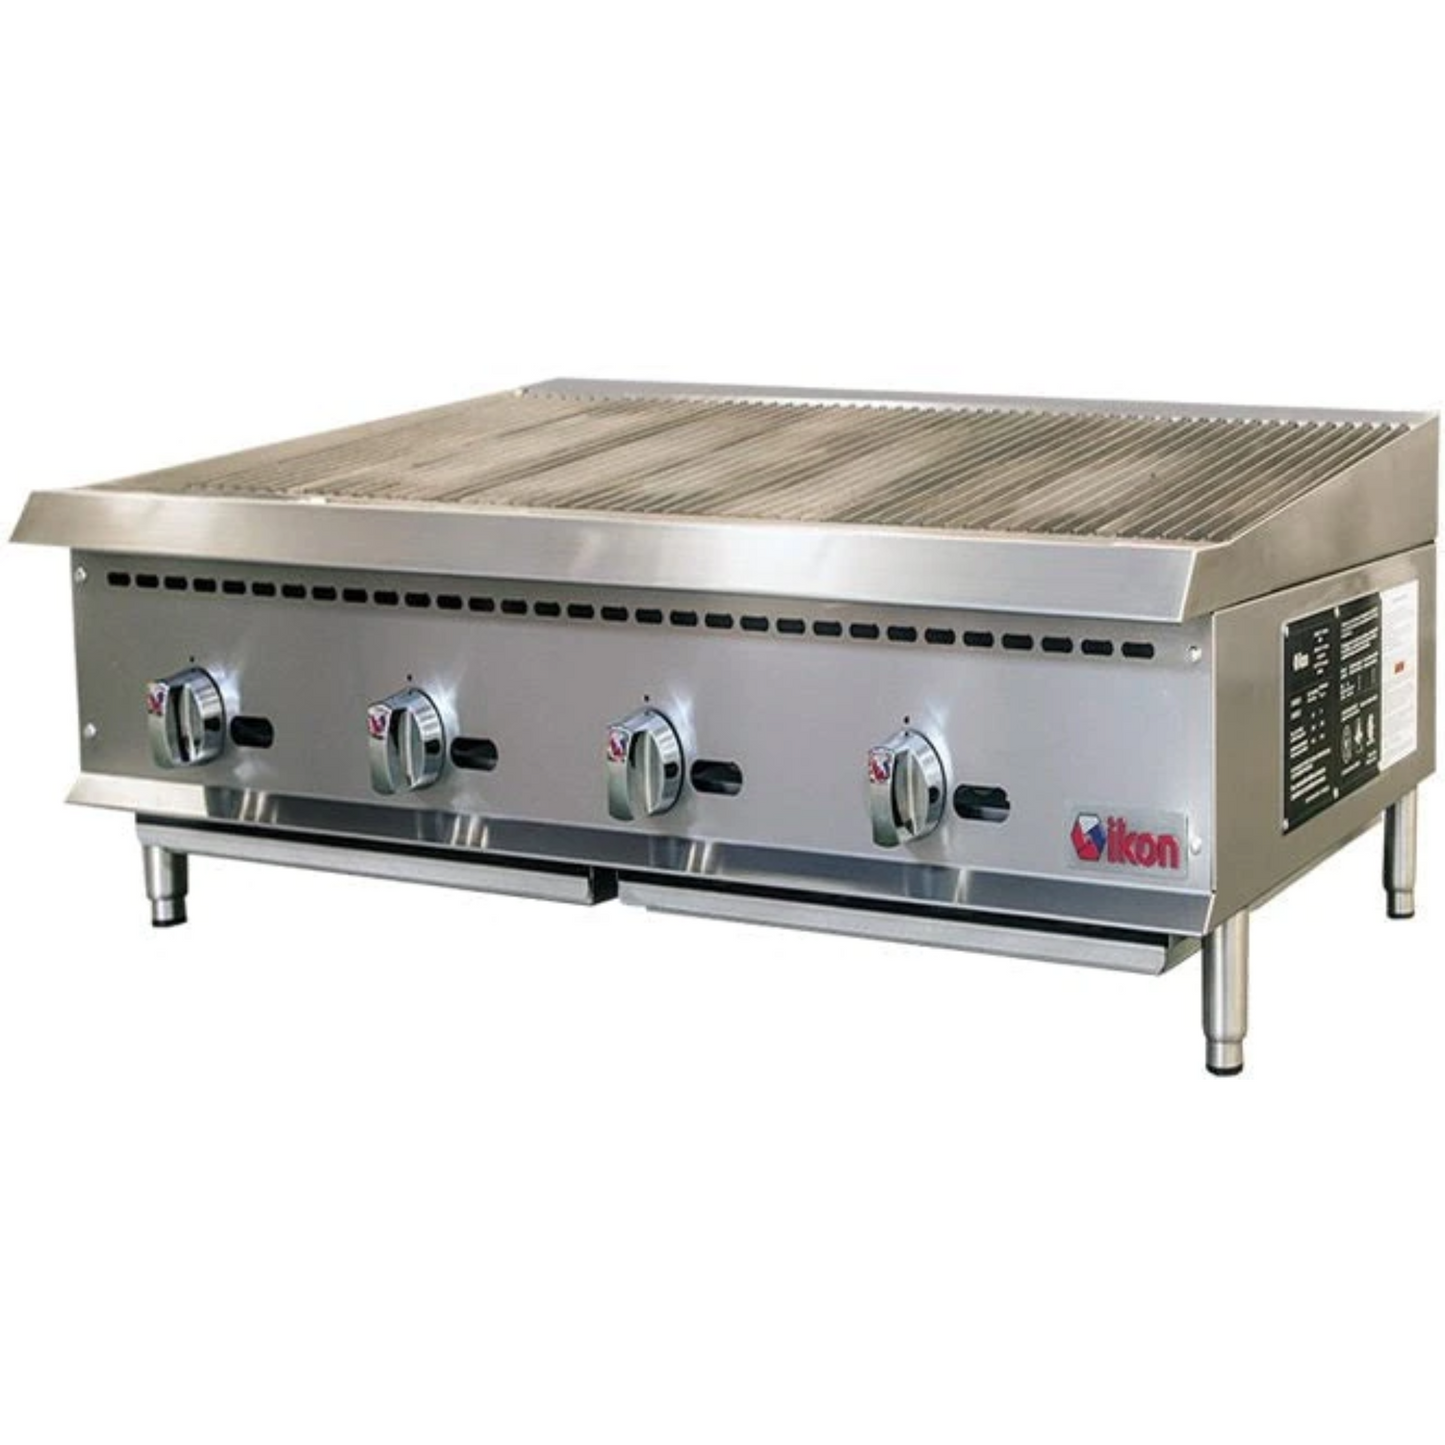 IKON Cooking IRB-48 48” Radiant Gas Broiler